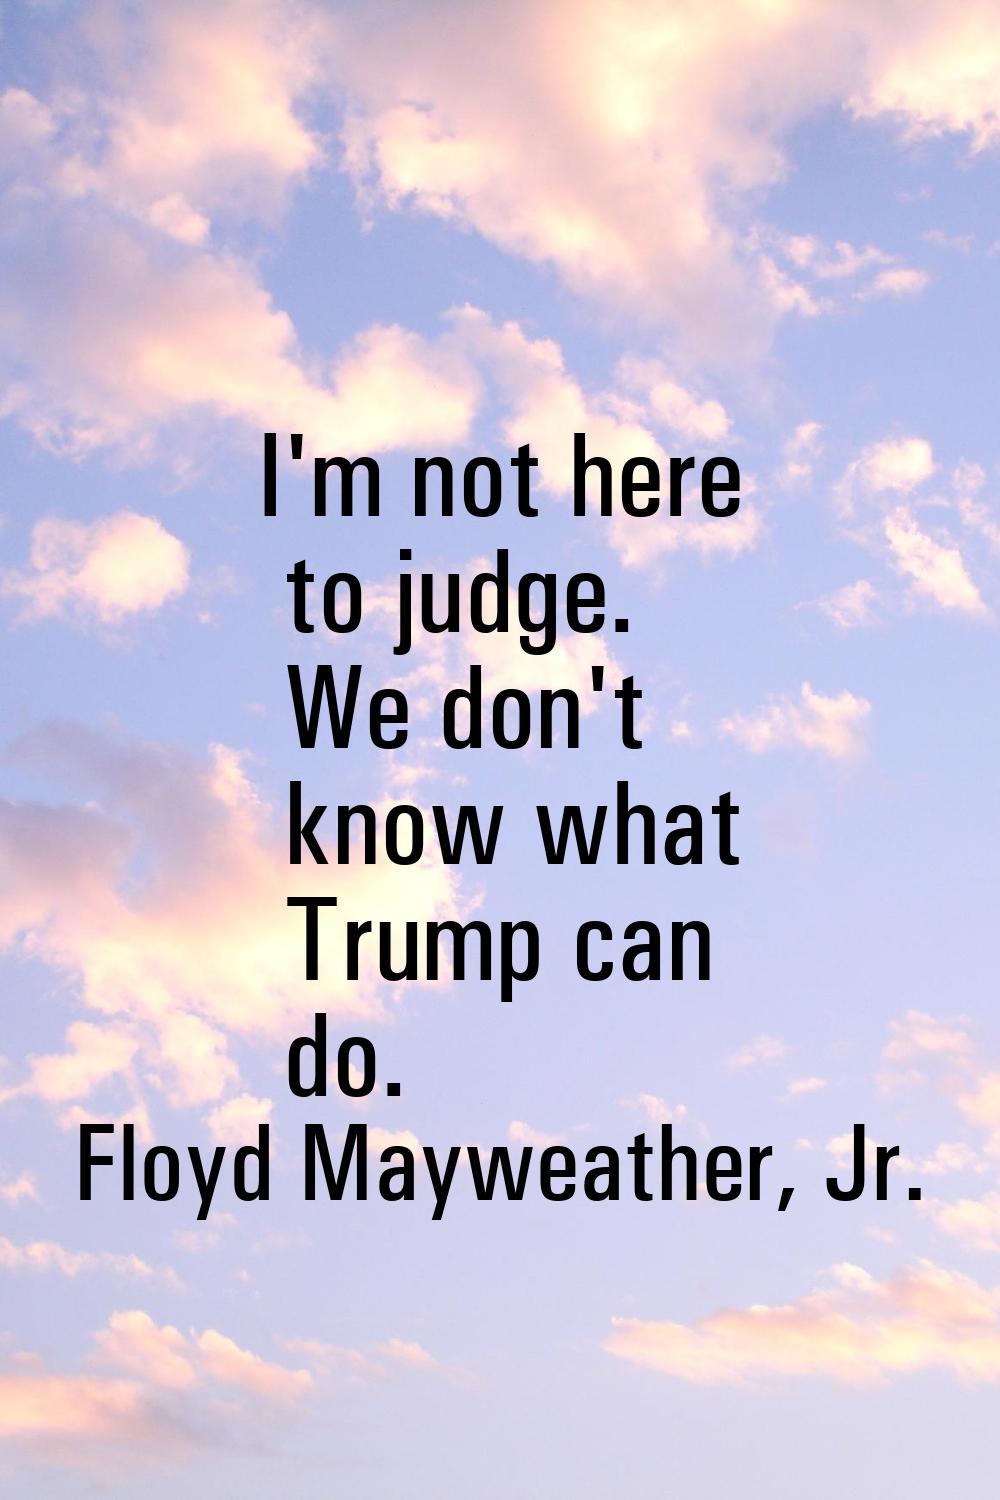 I'm not here to judge. We don't know what Trump can do.